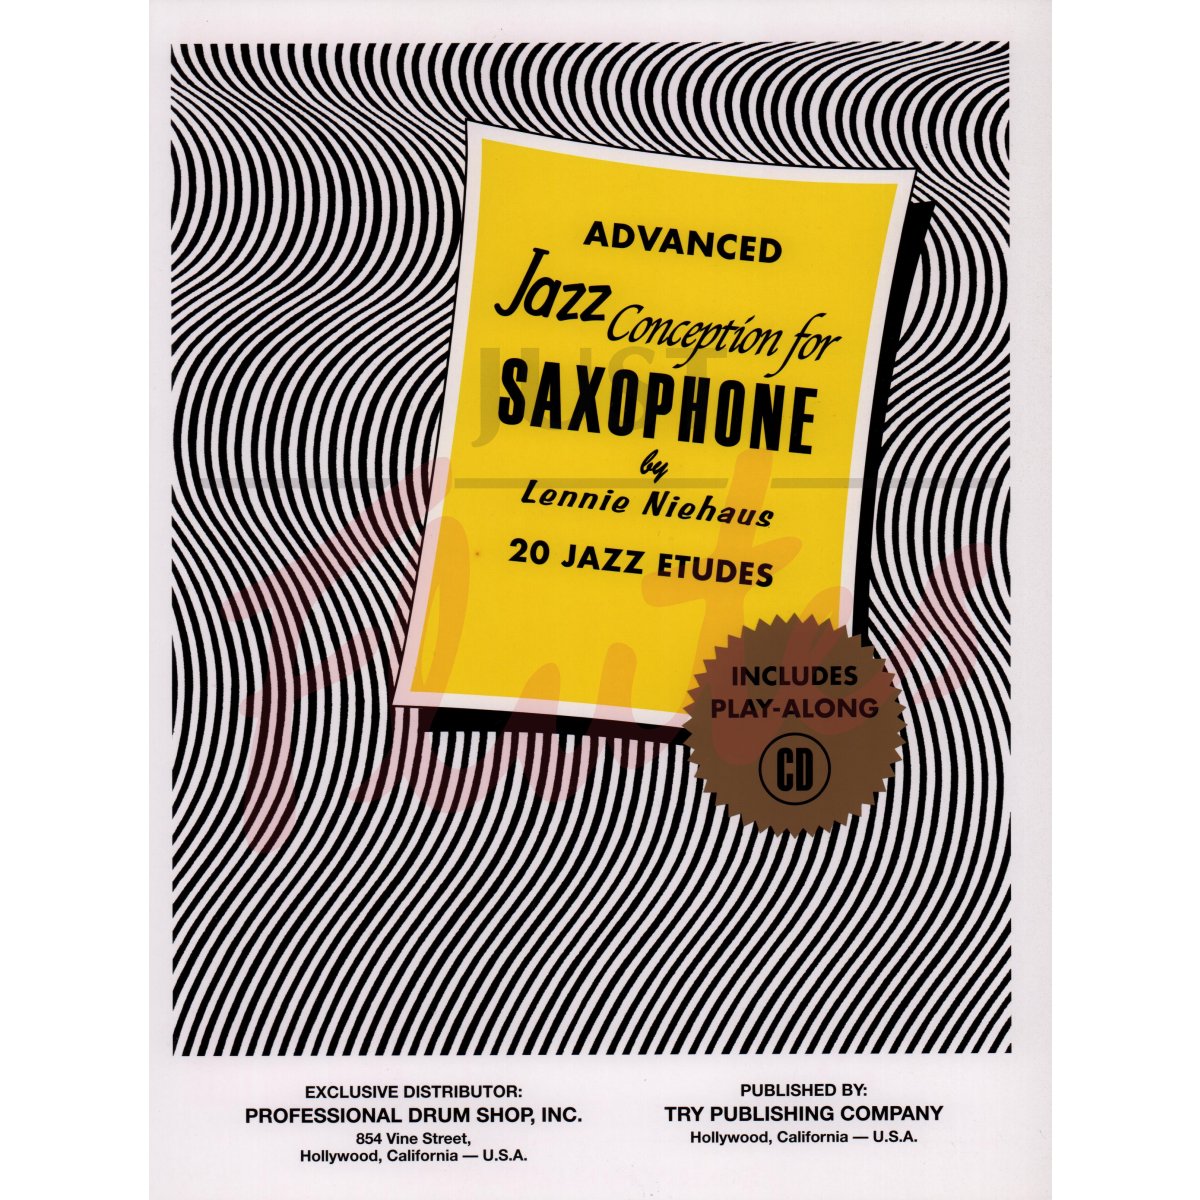 Advanced Jazz Conception for Saxophone